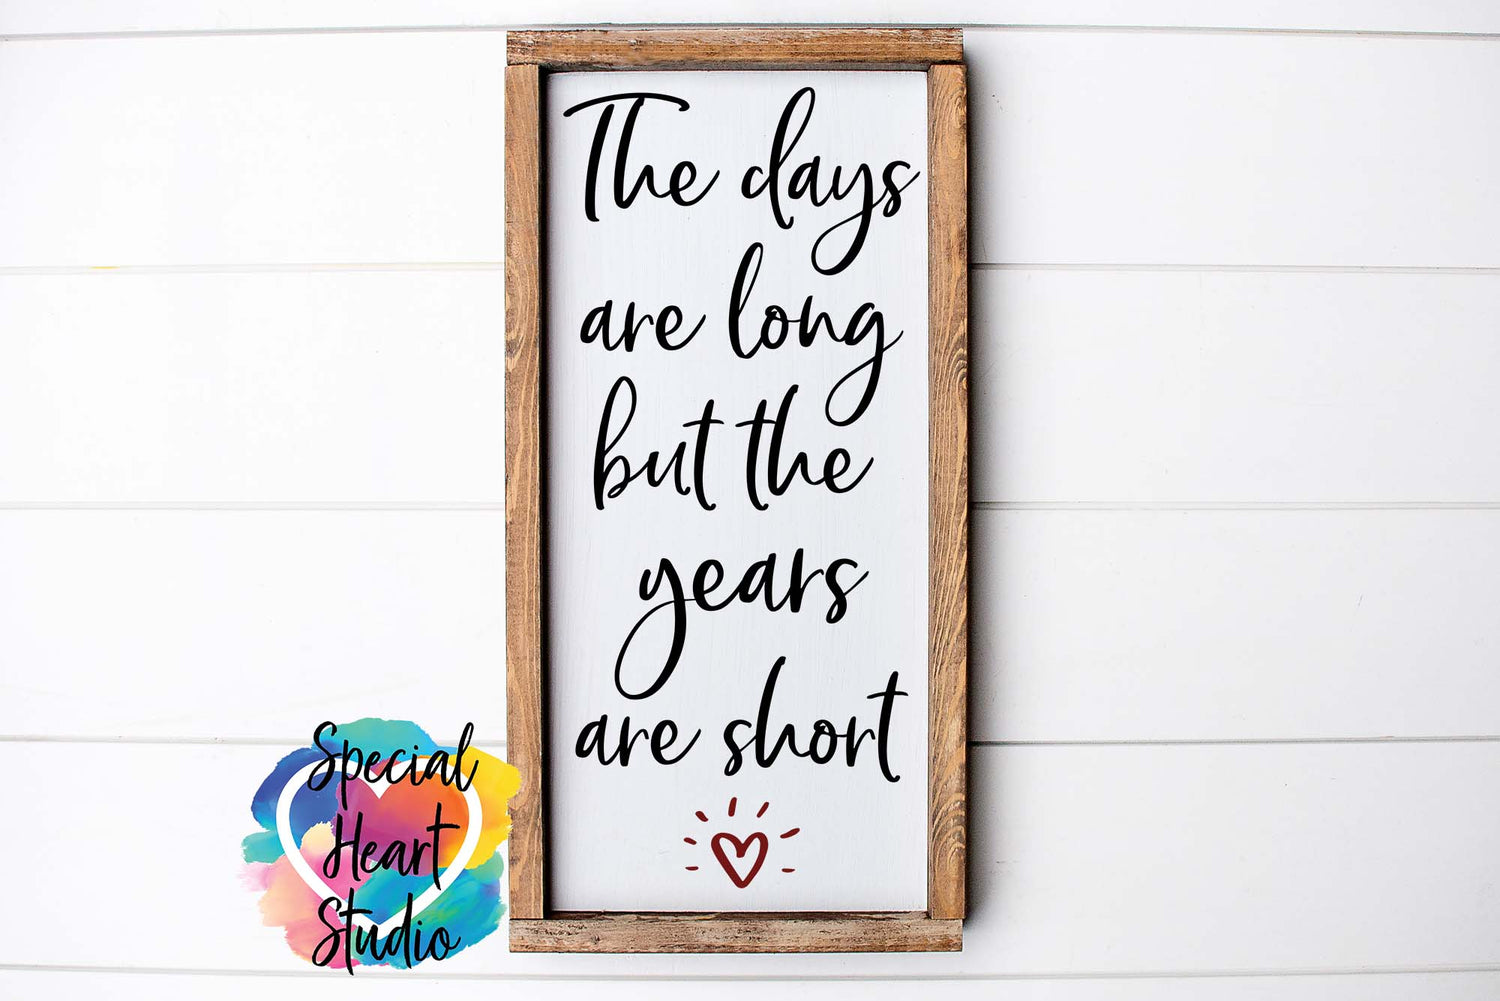 SVG file saying "The days are long but the years are short" on a sign mockup